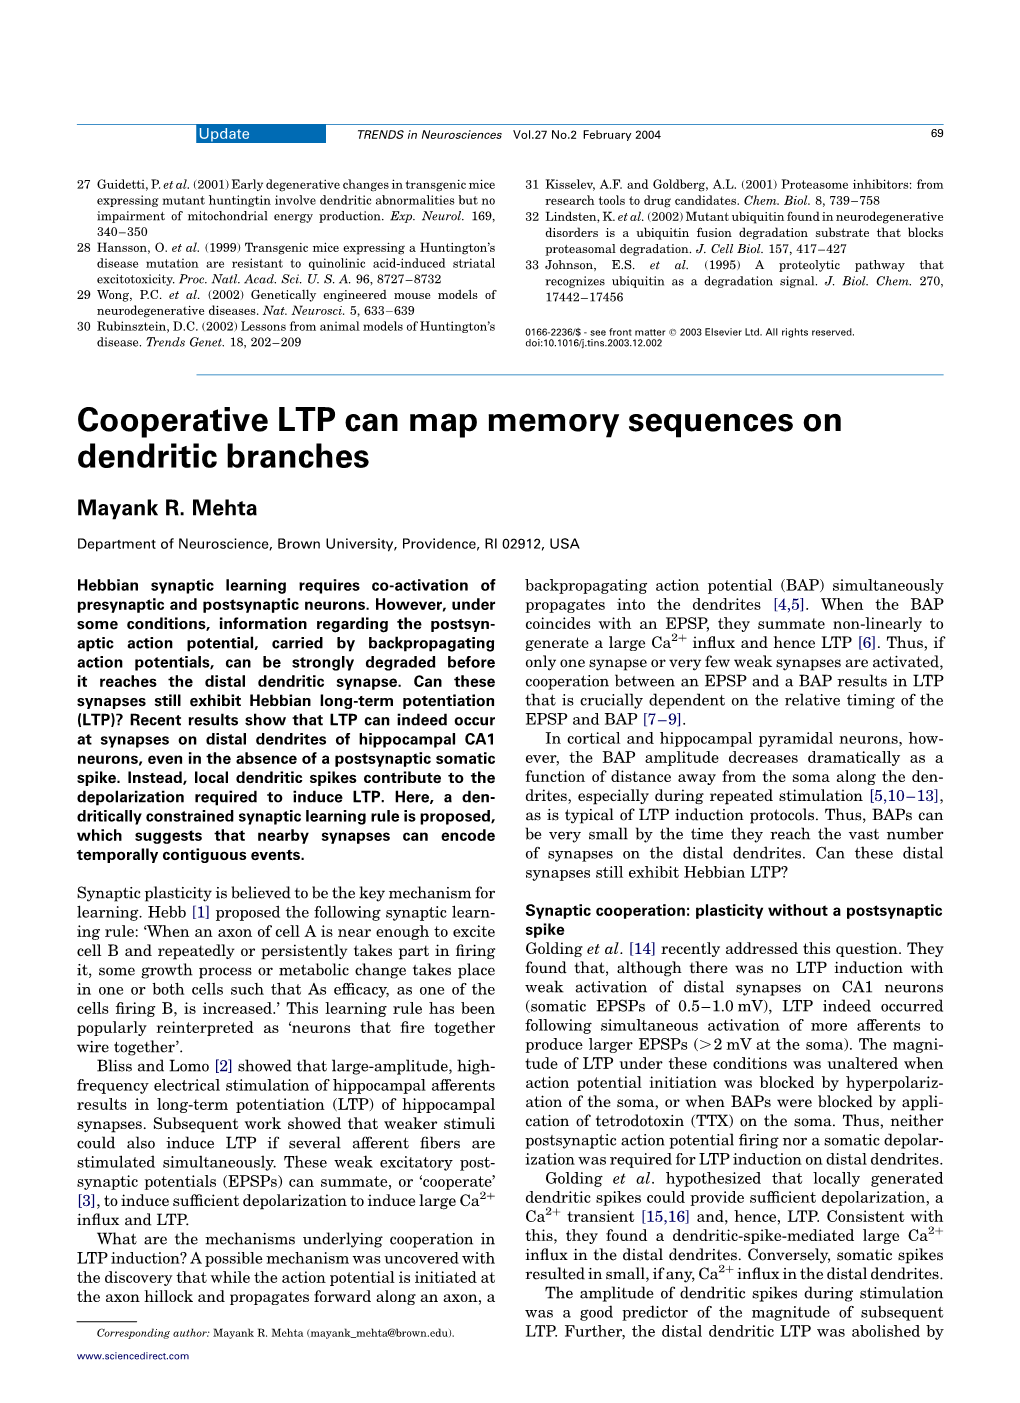 Cooperative LTP Can Map Memory Sequences on Dendritic Branches